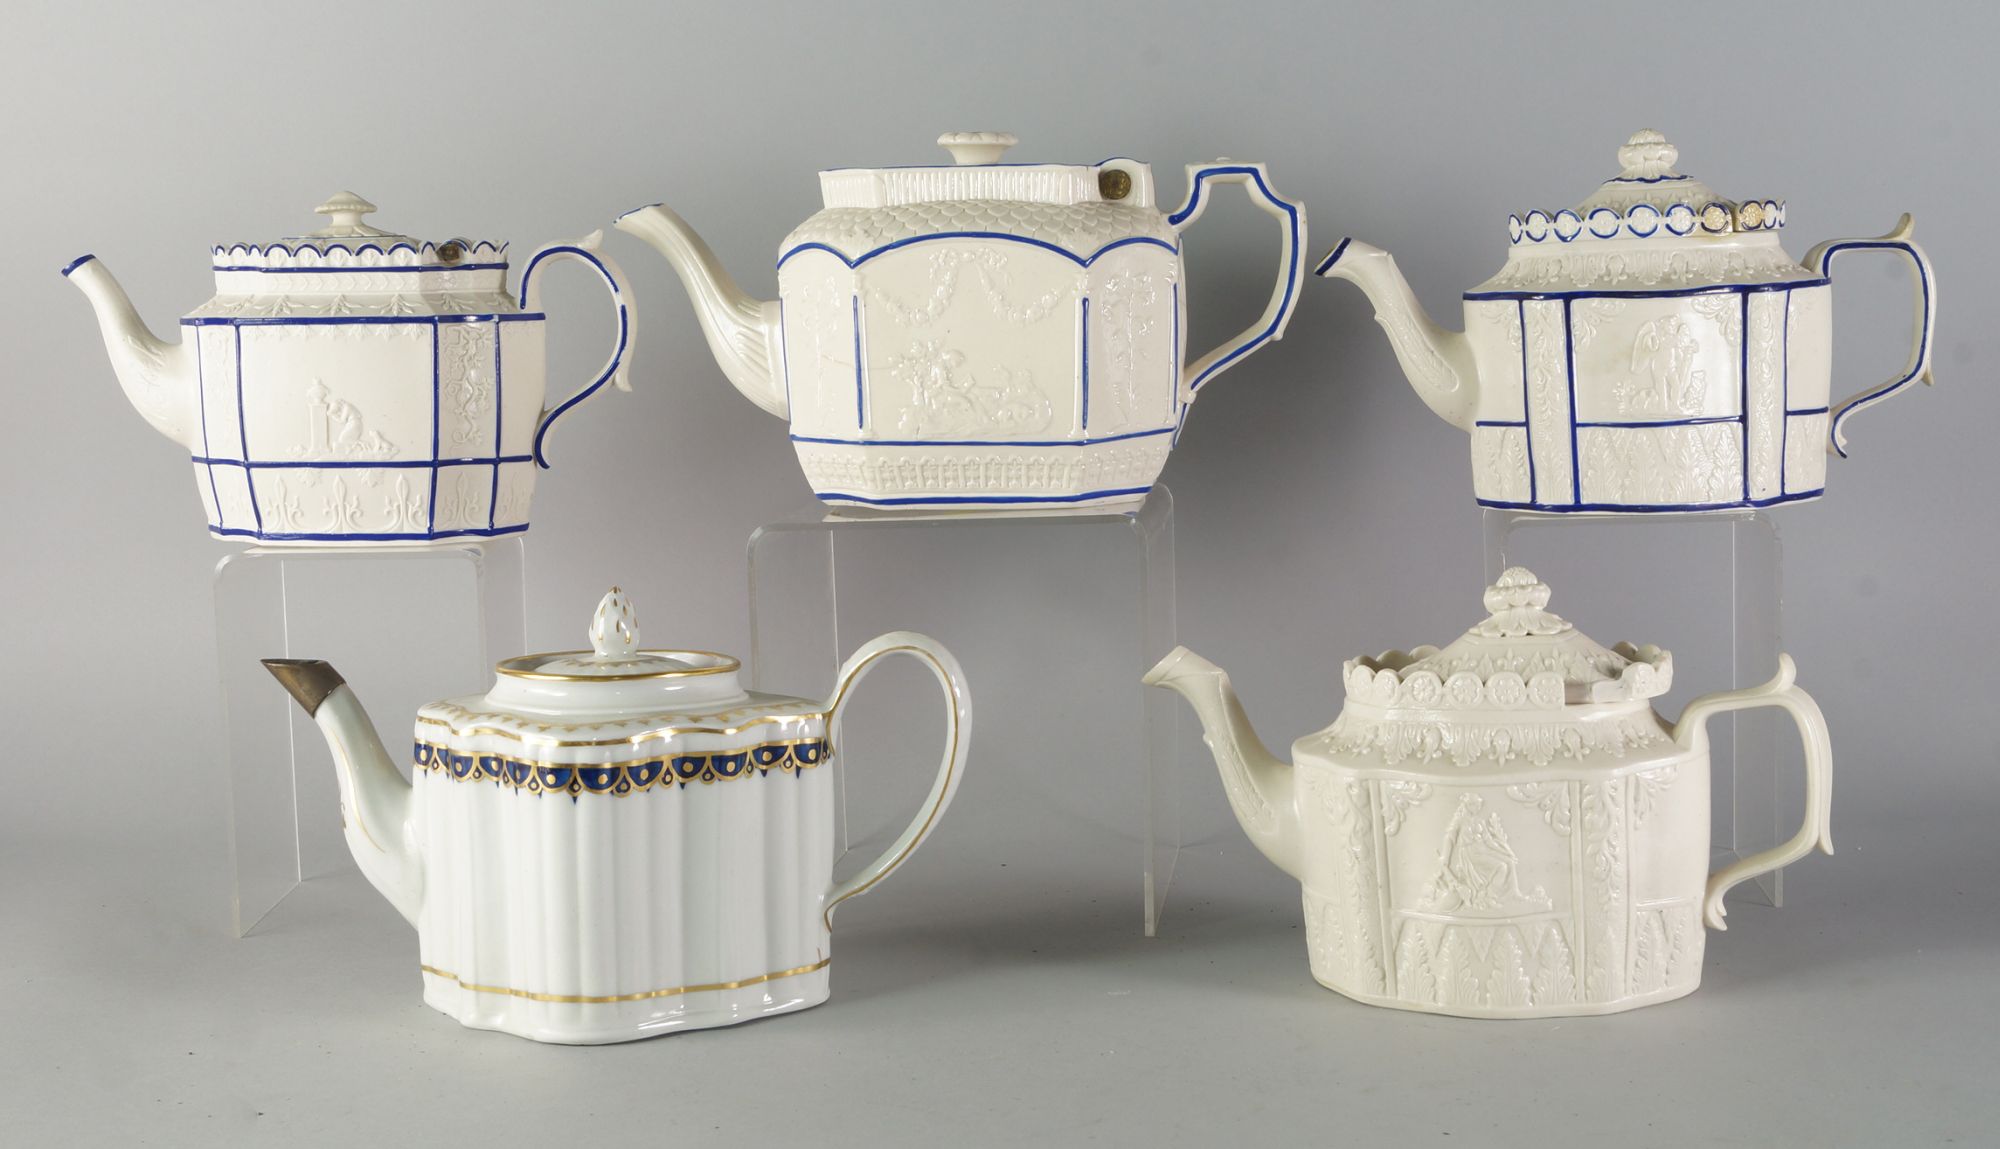 Four Parian porcelain tea pots, early 19th century, three of which highlighted in blue enamel work,